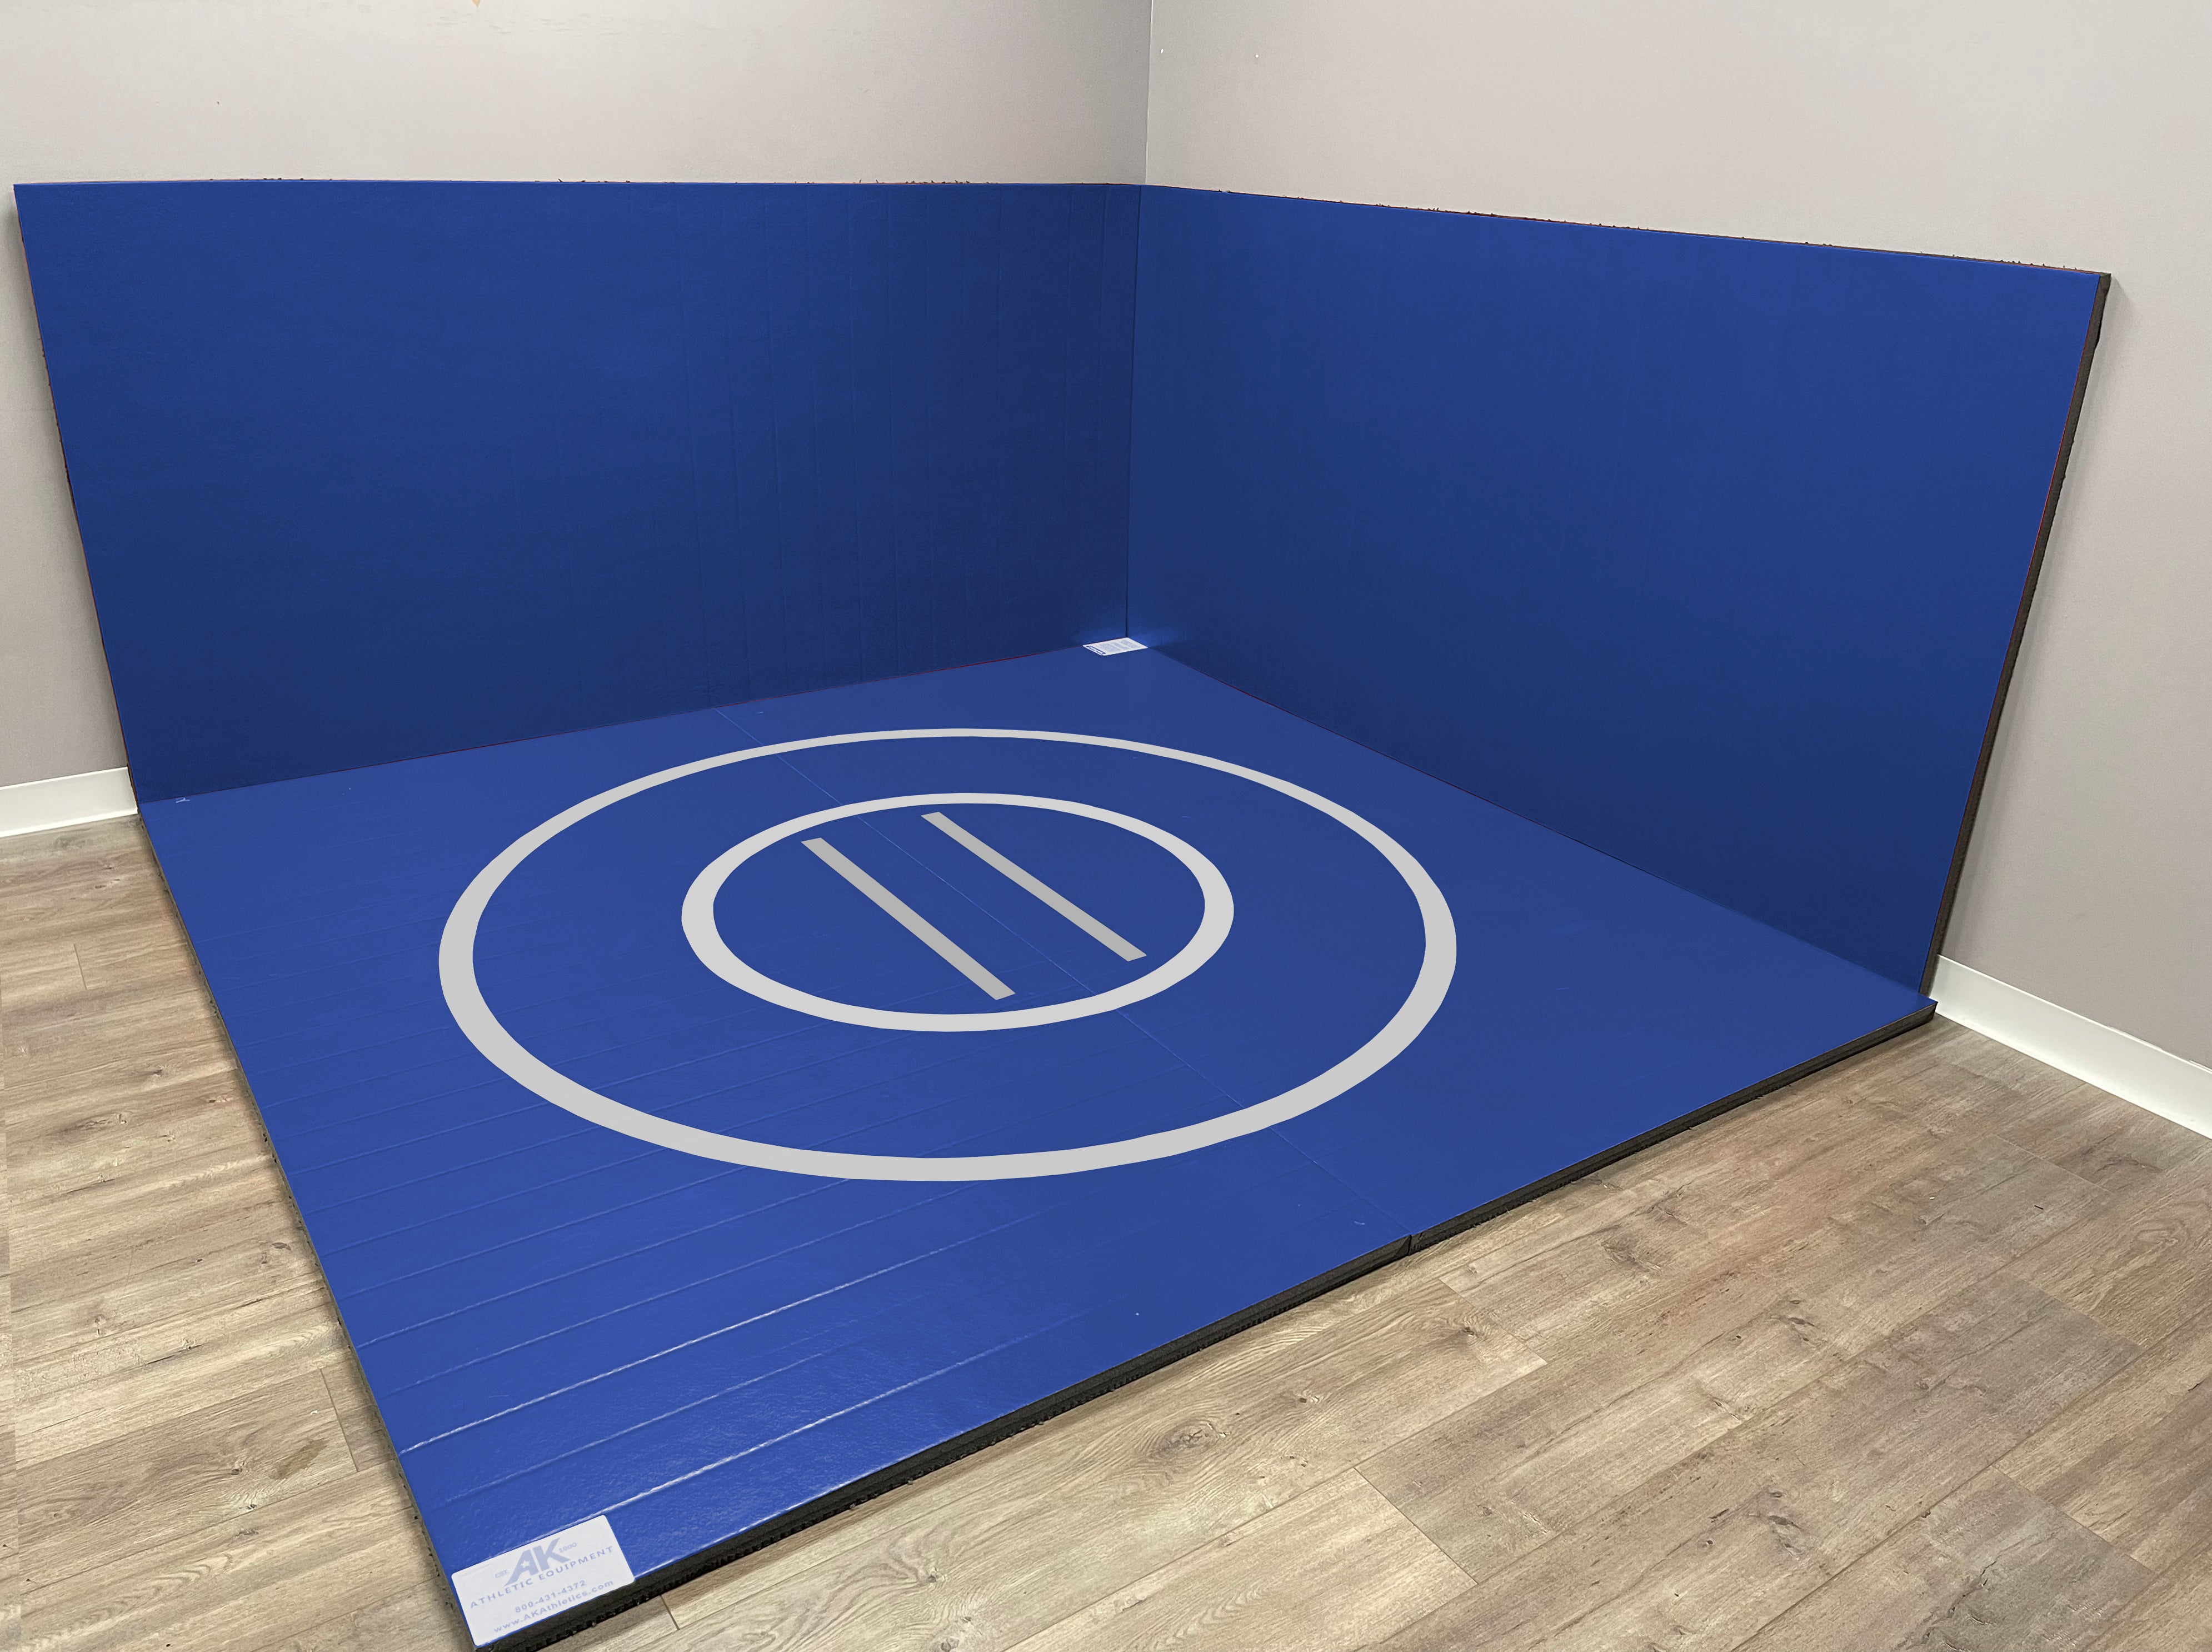 Instant Wrestling Room 12' x 12' wrestling mat and Removable Roll Up W